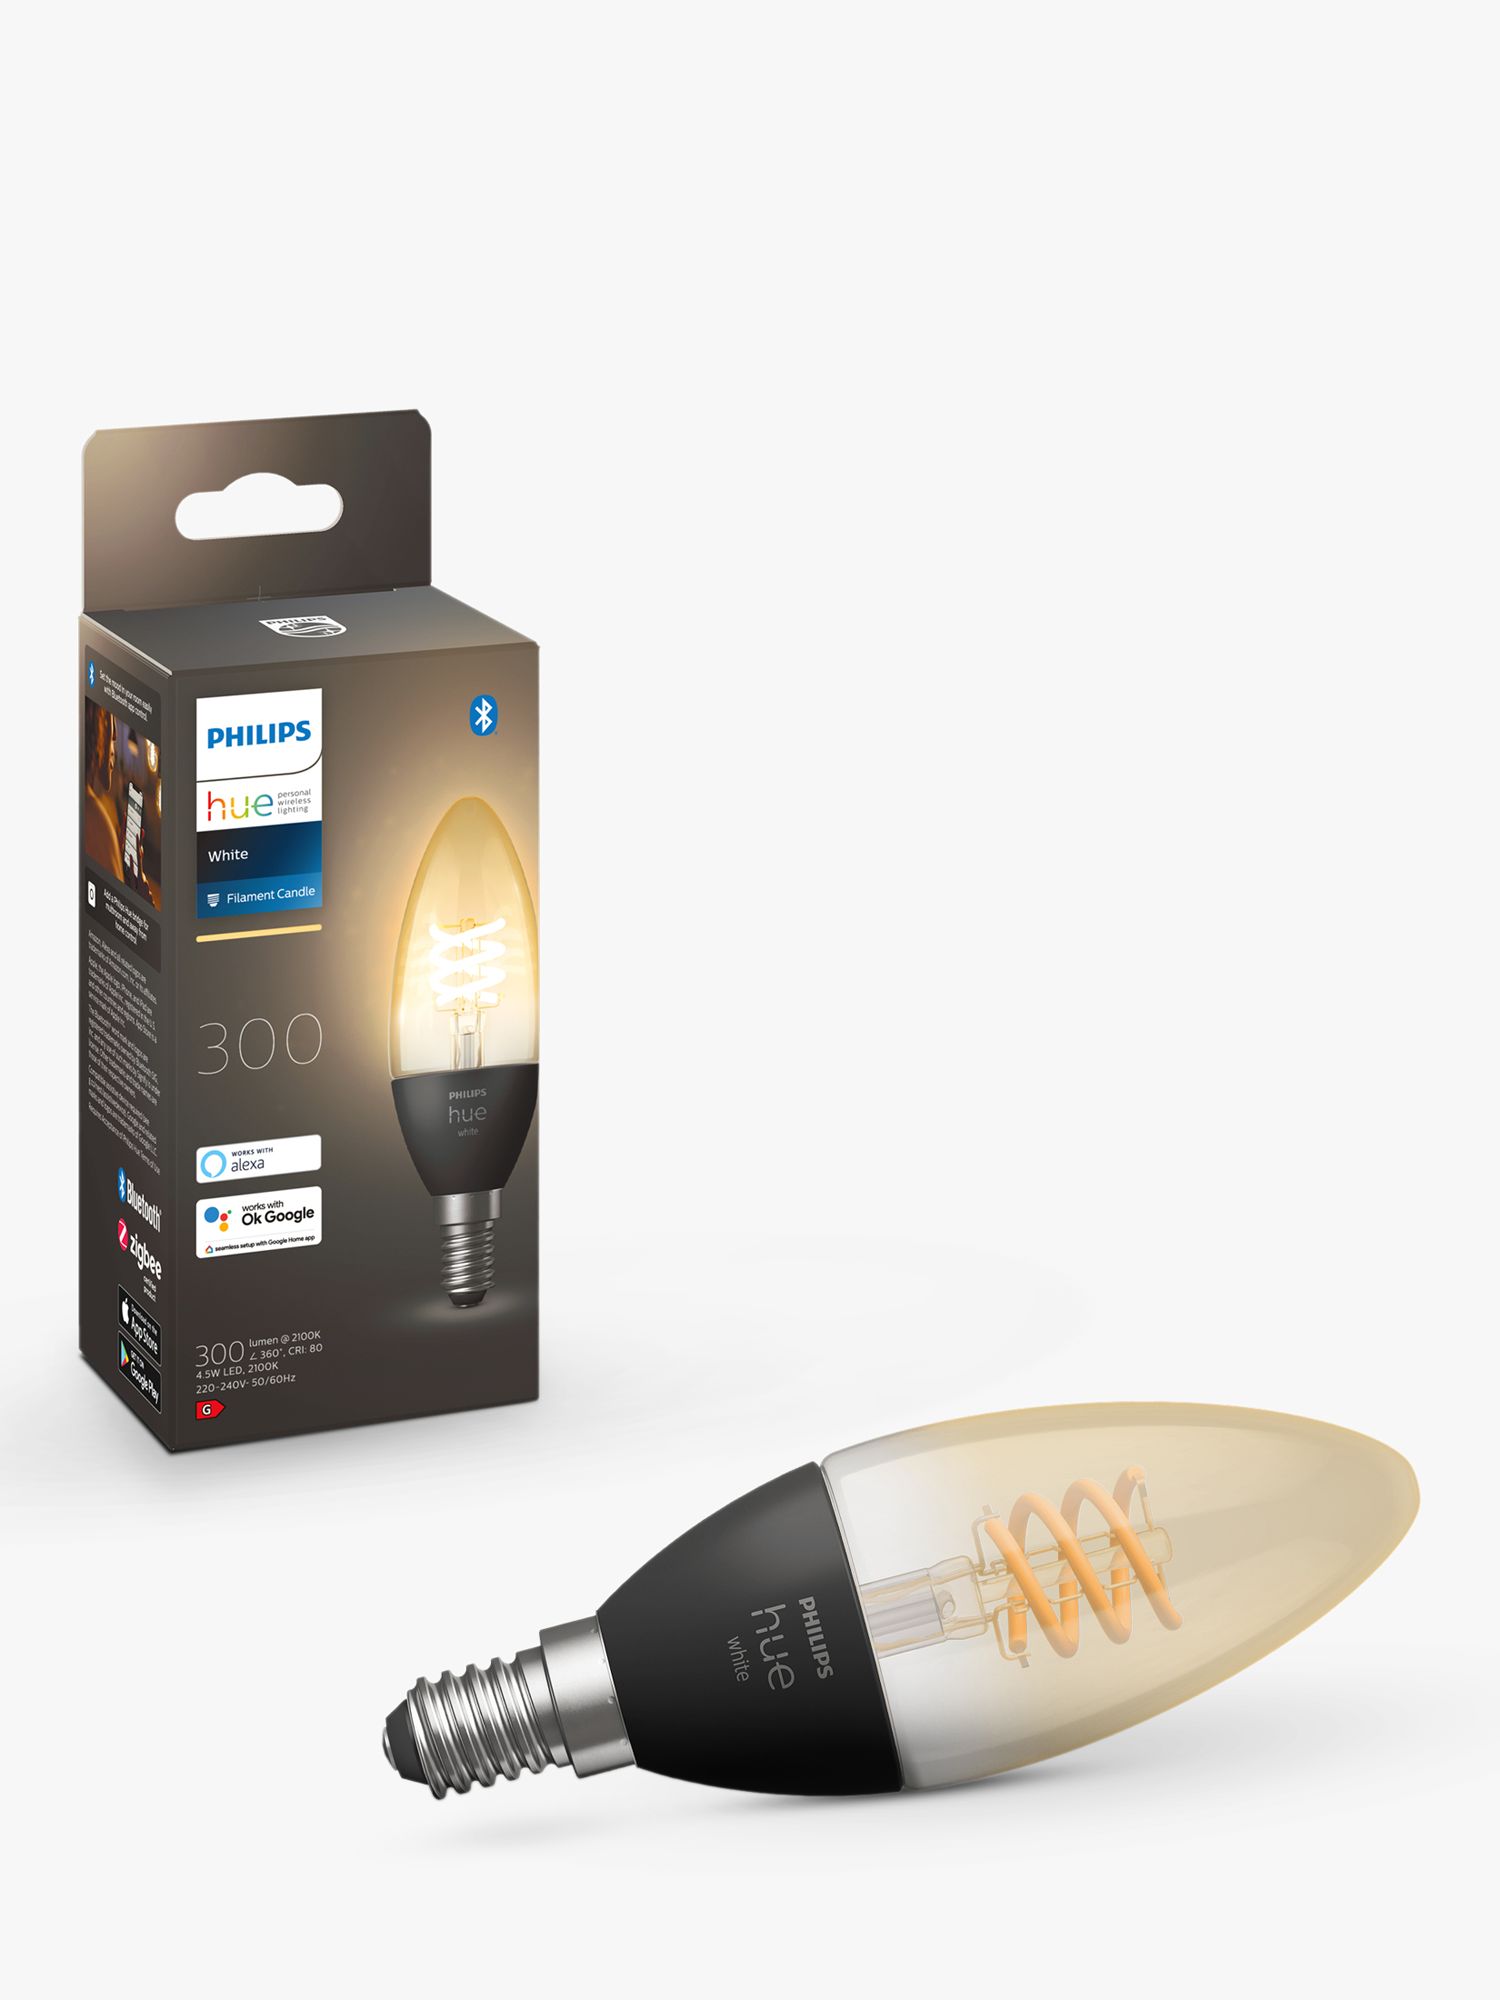 Photo of Philips hue white 4.5w e14 led single filament dimmable smart bulb with bluetooth